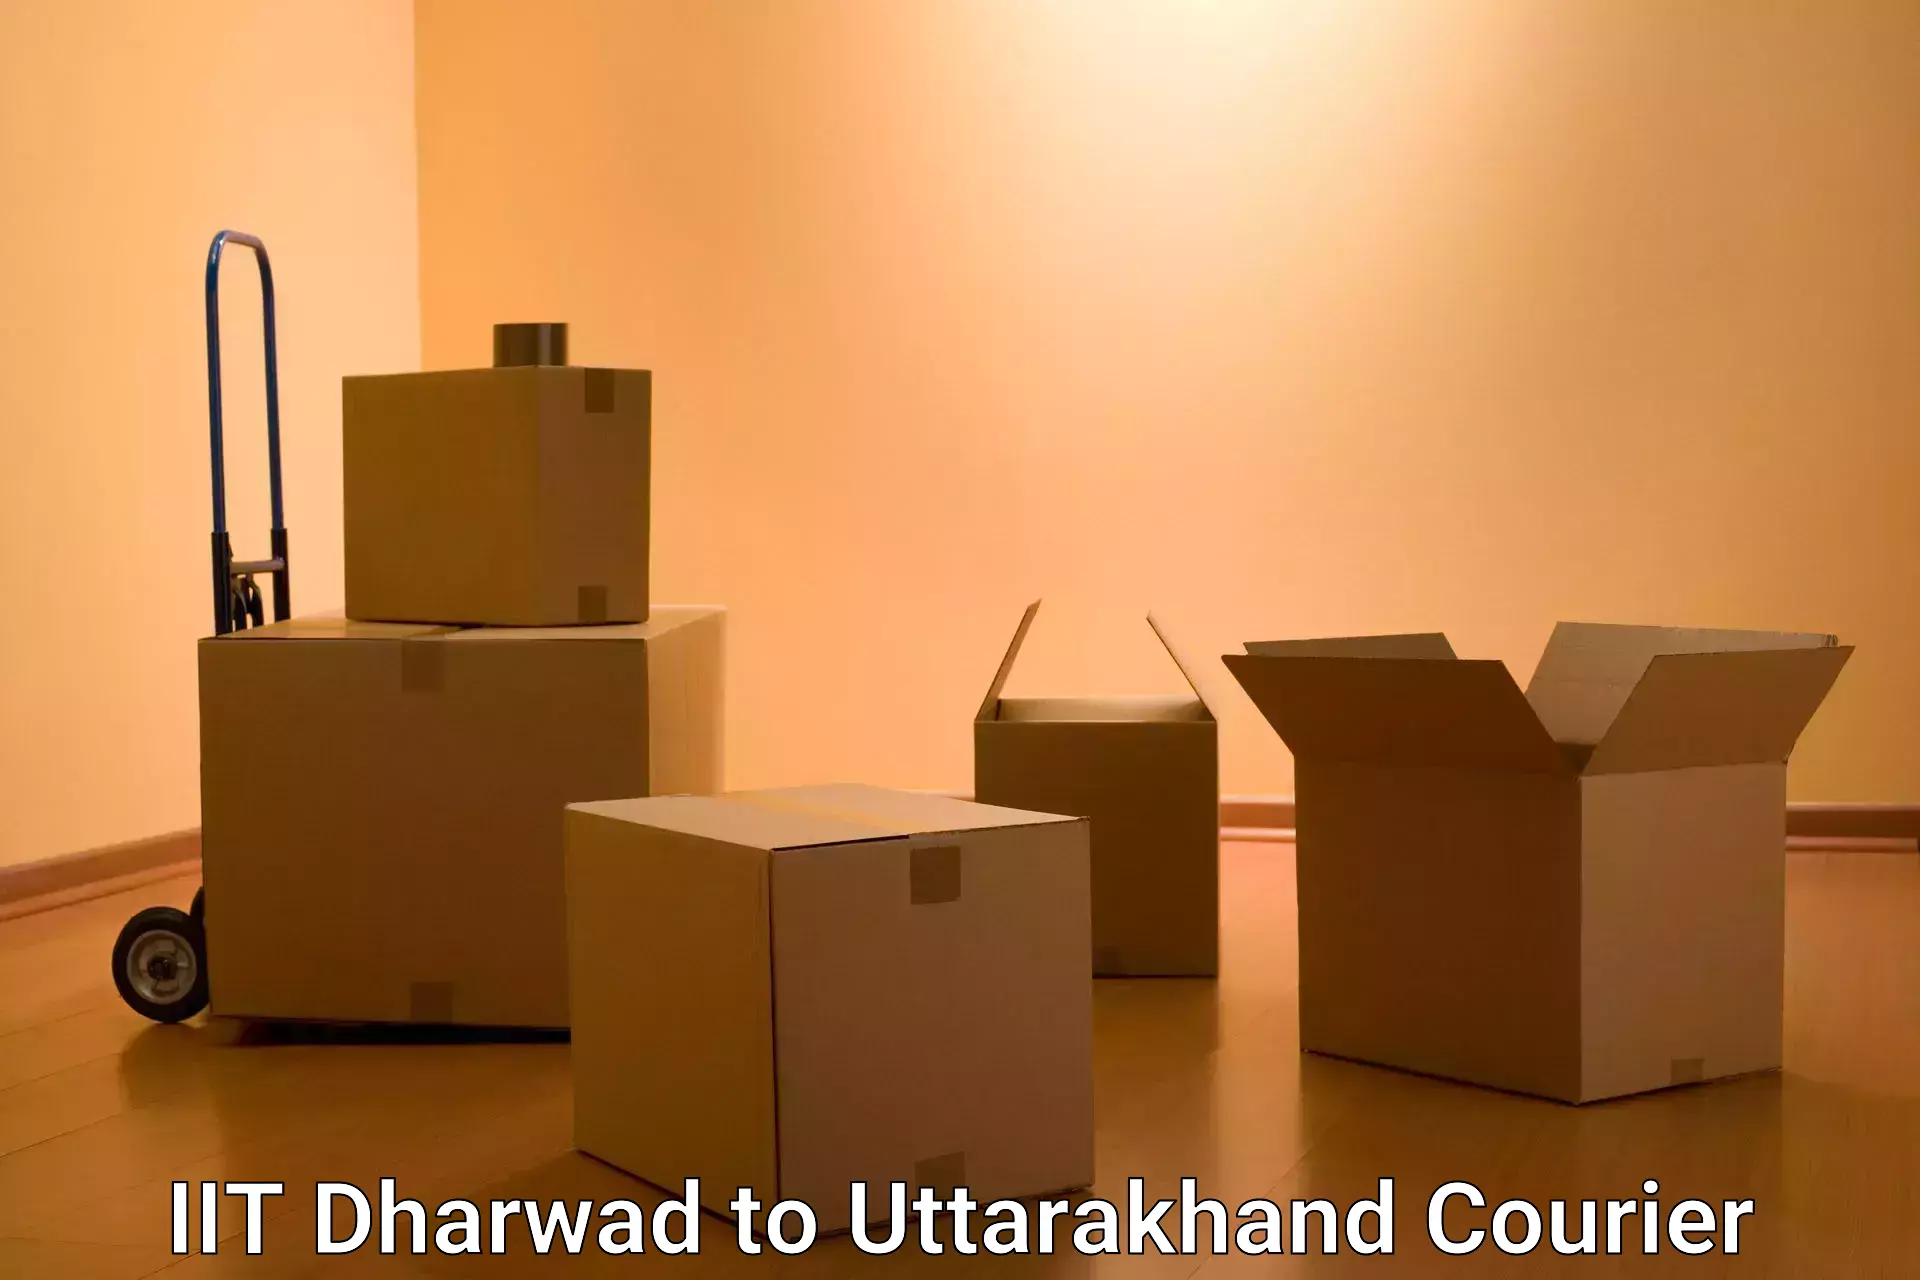 State-of-the-art courier technology IIT Dharwad to Champawat